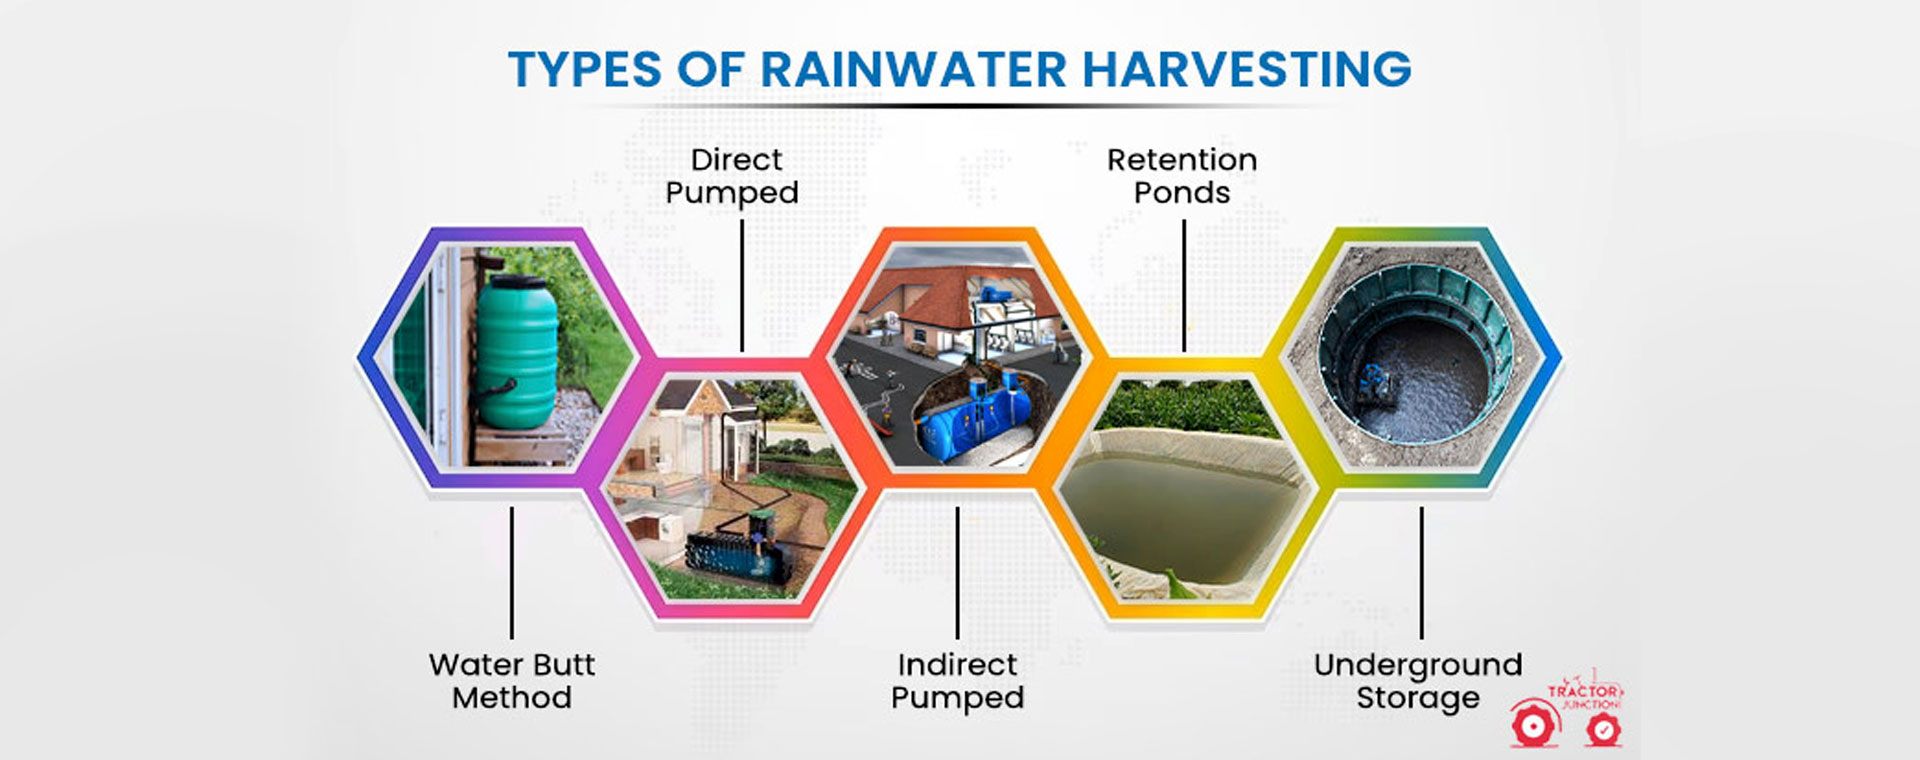 Groundwater - Rainwater Harvesting Plan For Industry, Mining, Civil And Others